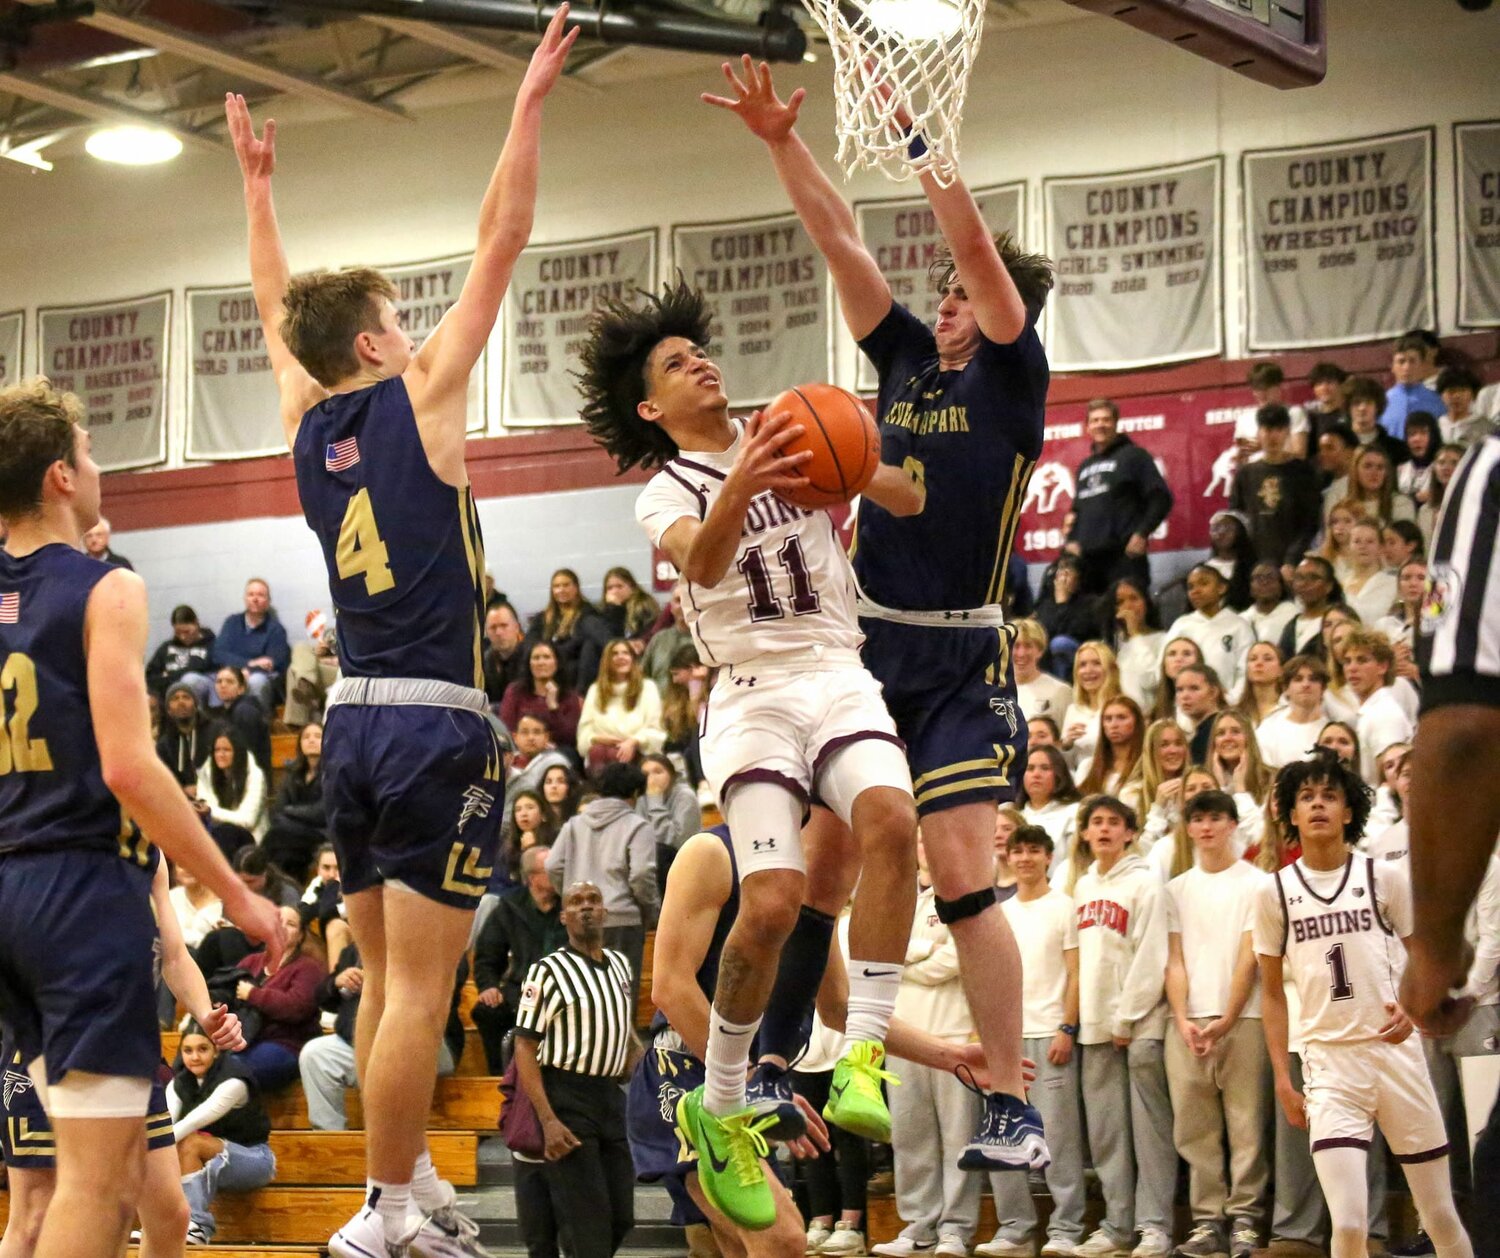 Broadneck’s Jordan Brown (11) went up for a shot against the defense of Severna Park’s Tucker Moran (4) and Liam Cleary (0).